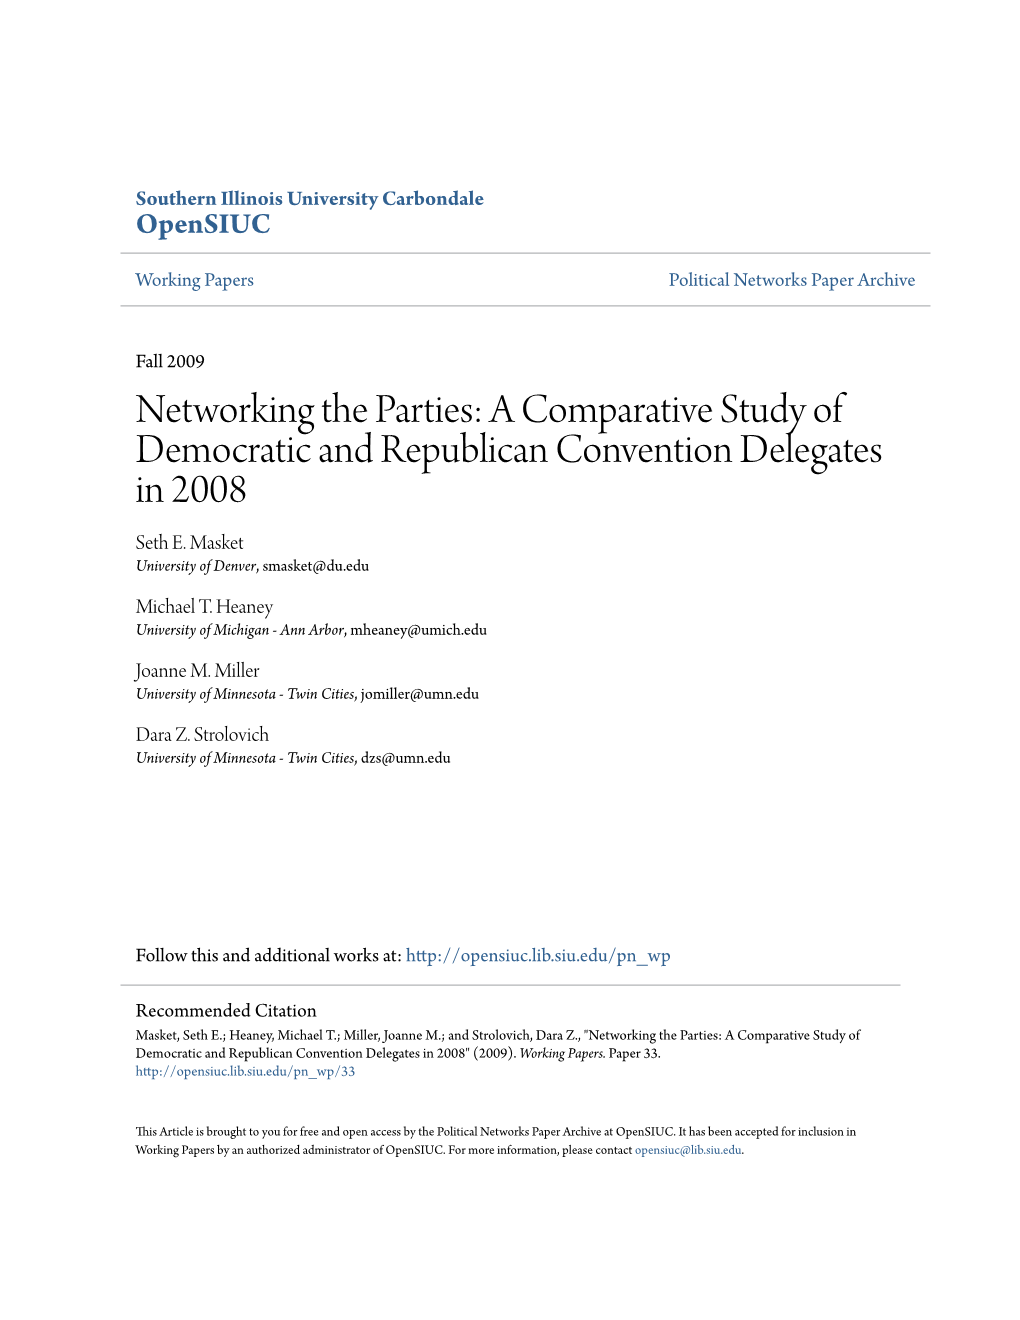 Networking the Parties: a Comparative Study of Democratic and Republican Convention Delegates in 2008 Seth E